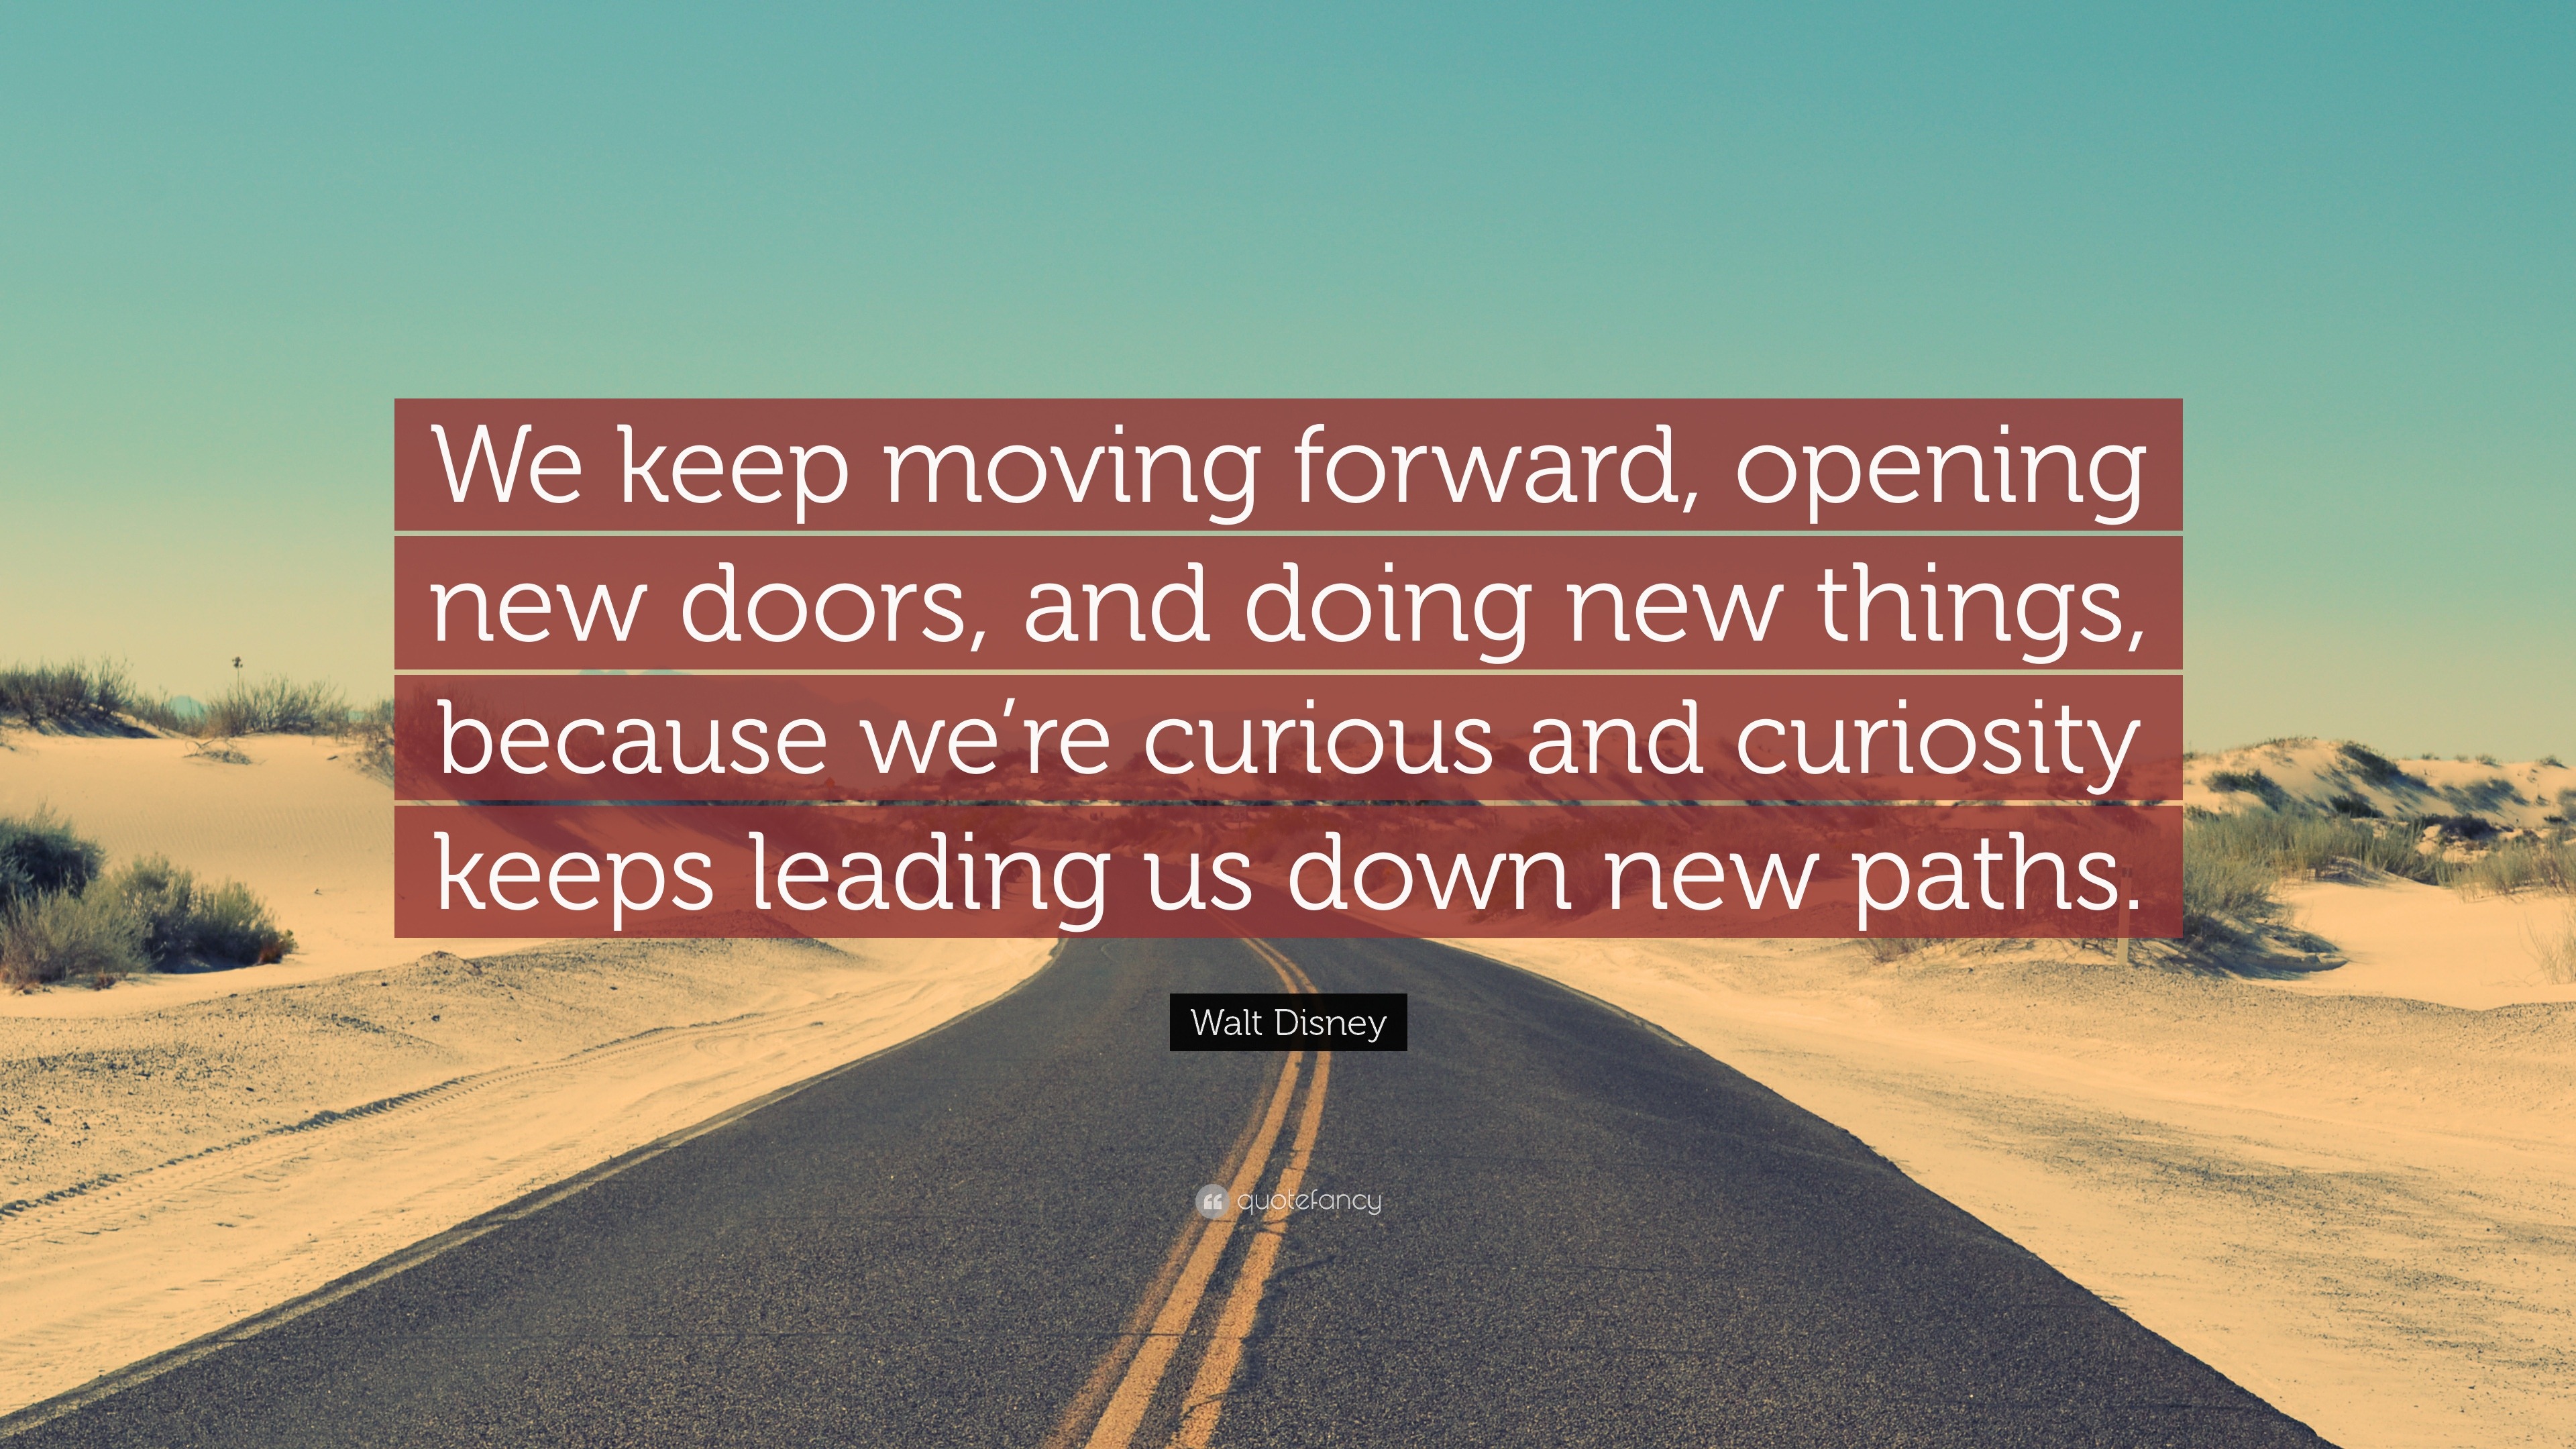 Walt Disney Quote “We keep moving forward, opening new